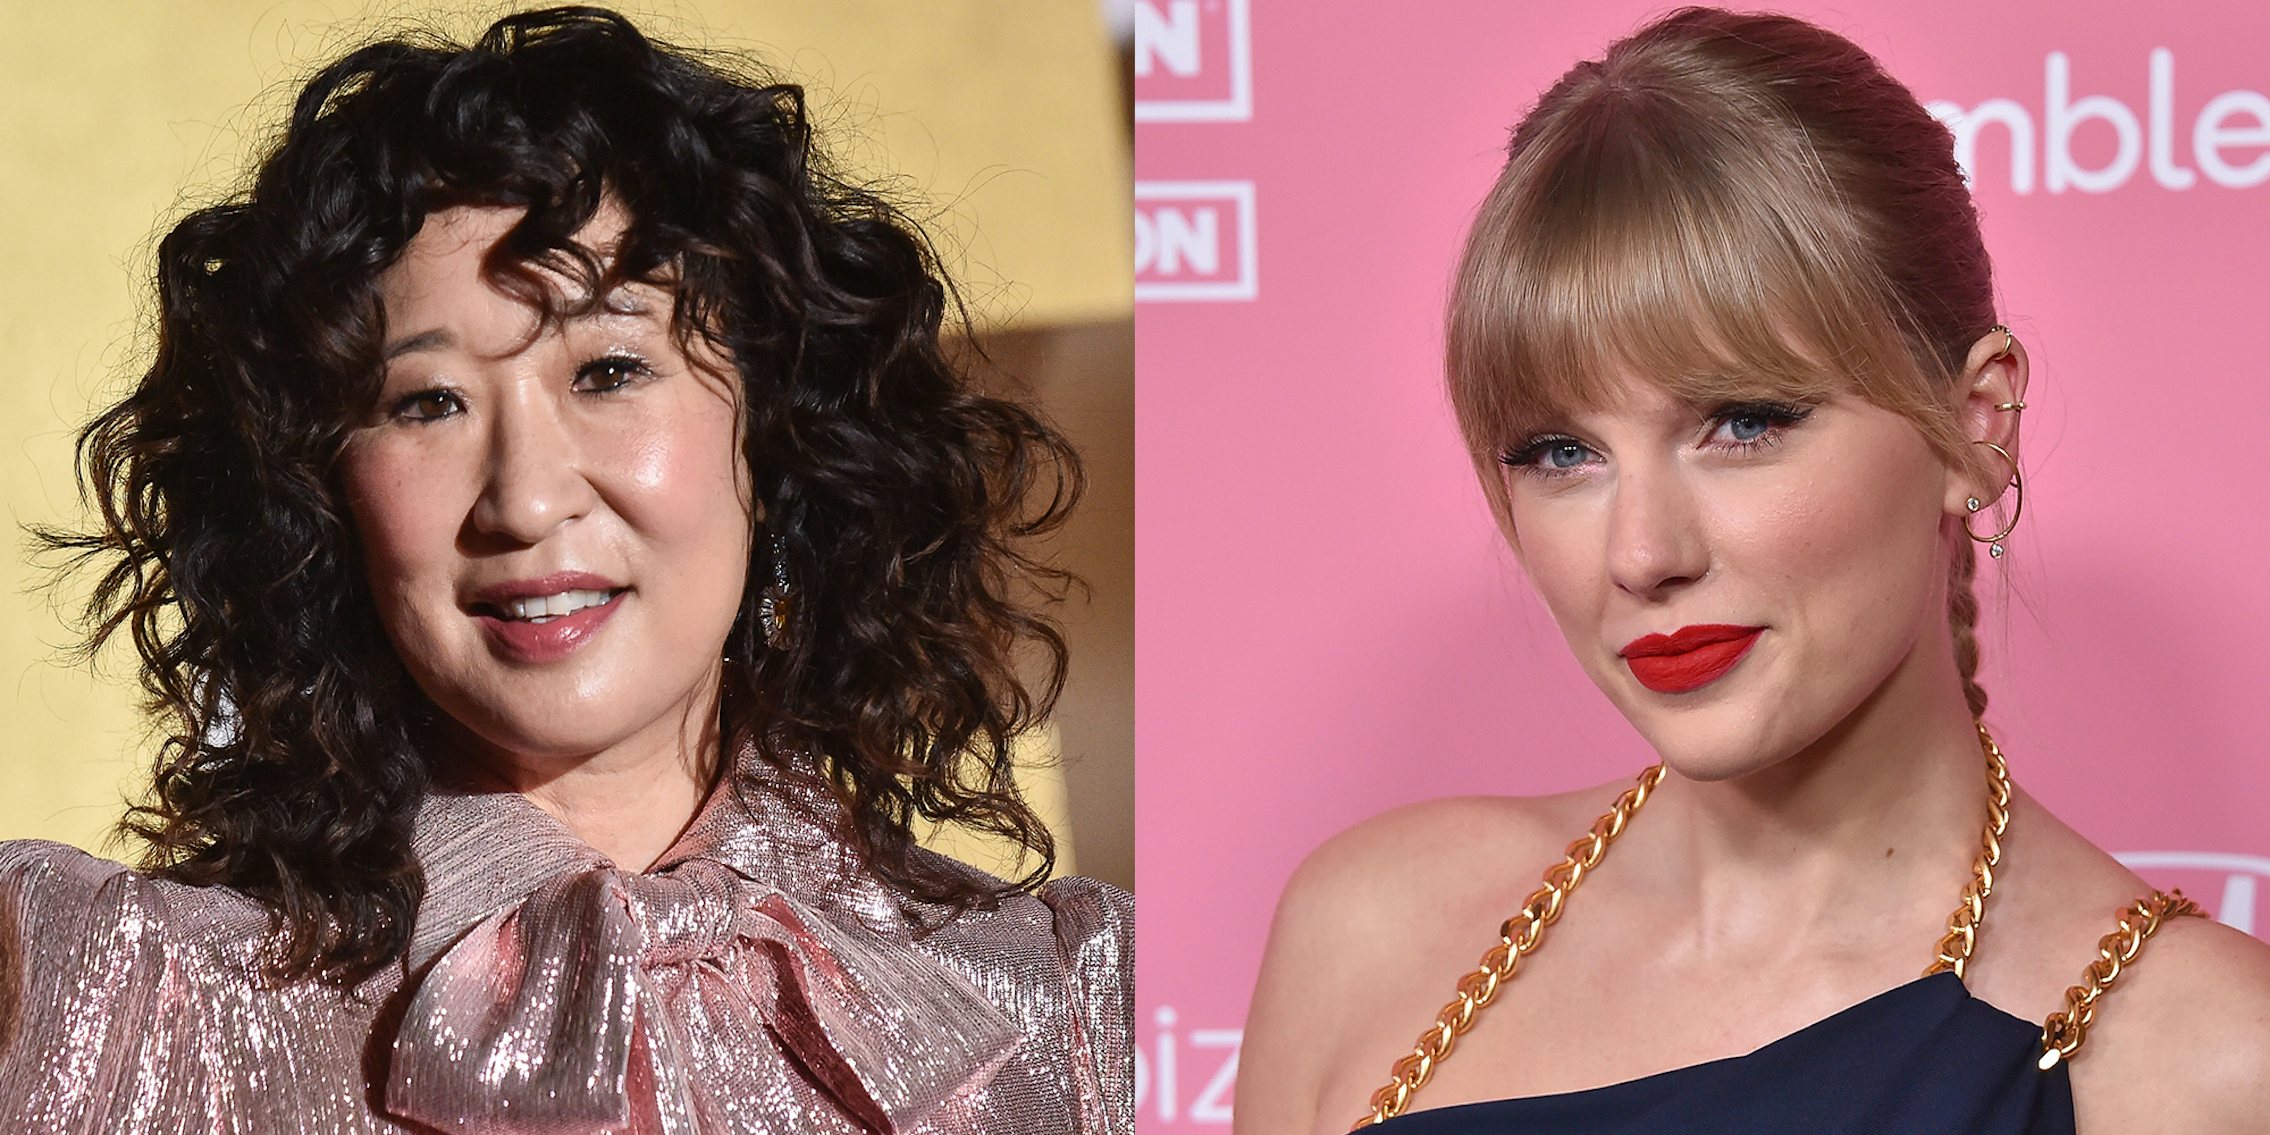 Girls realize they asked Sandra Oh to take their picture at Taylor Swift concert